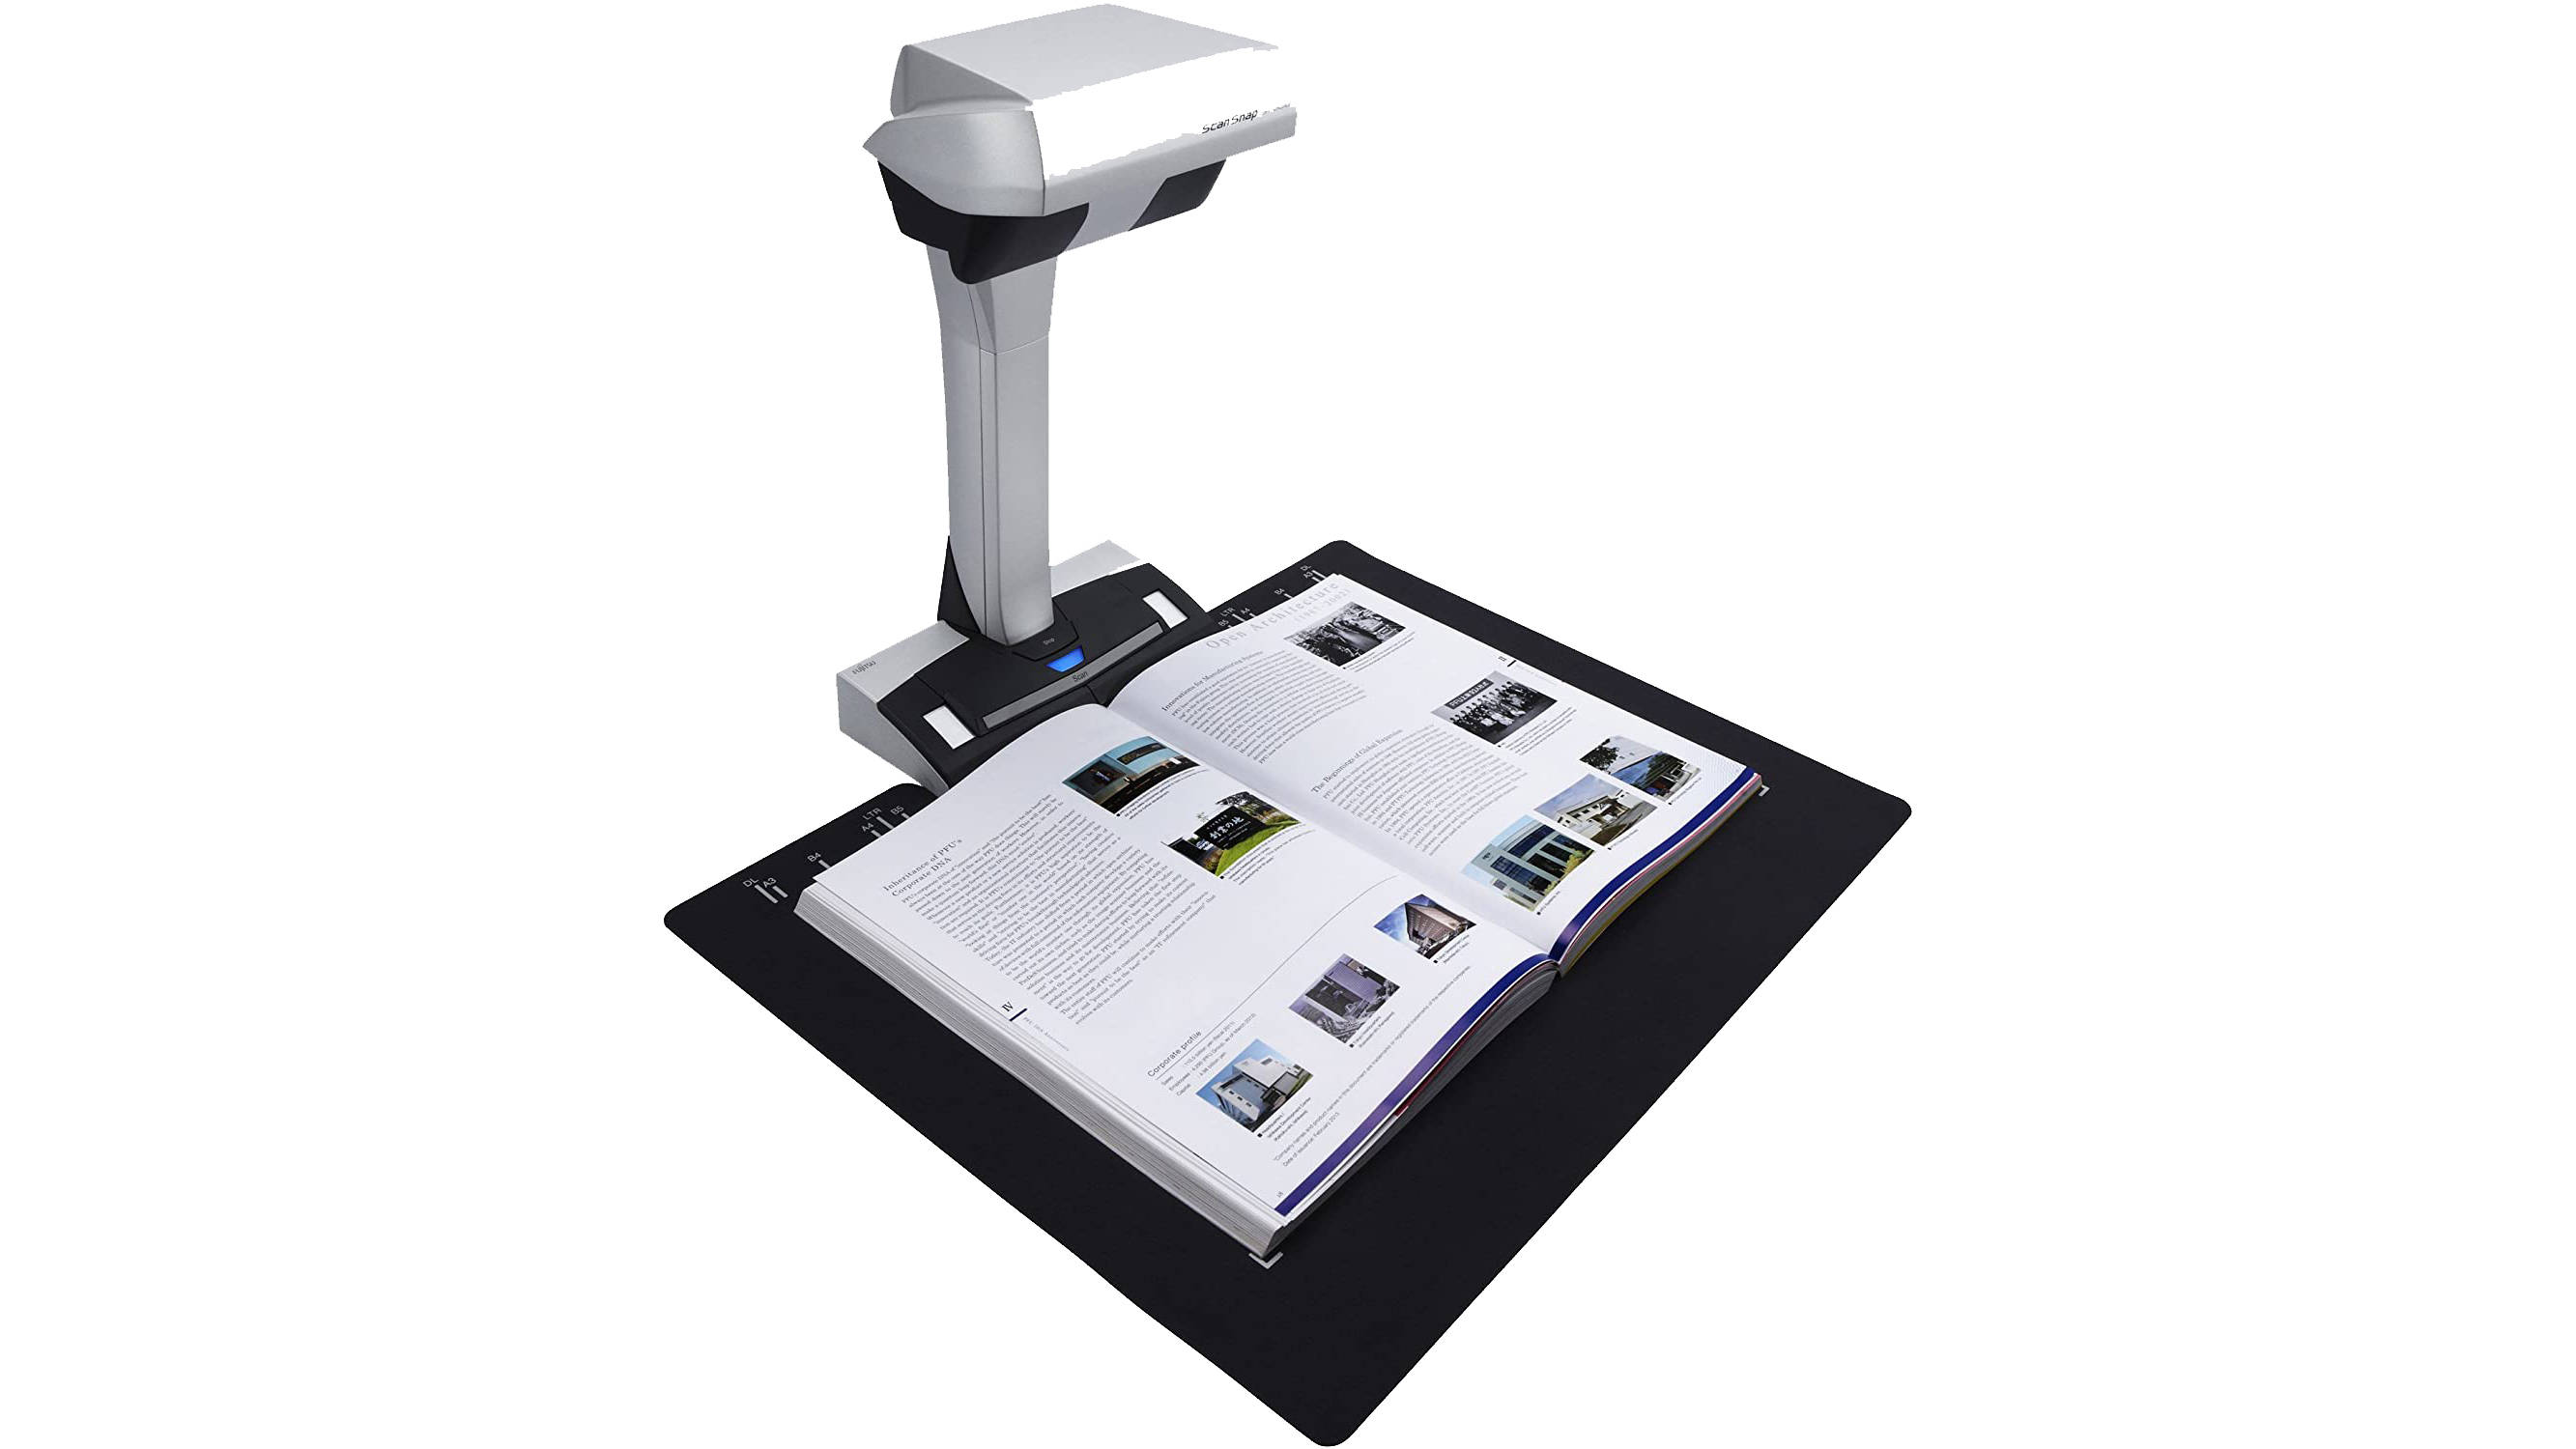 Do you dream of digitizing your entire book collection? This book scanner  can help